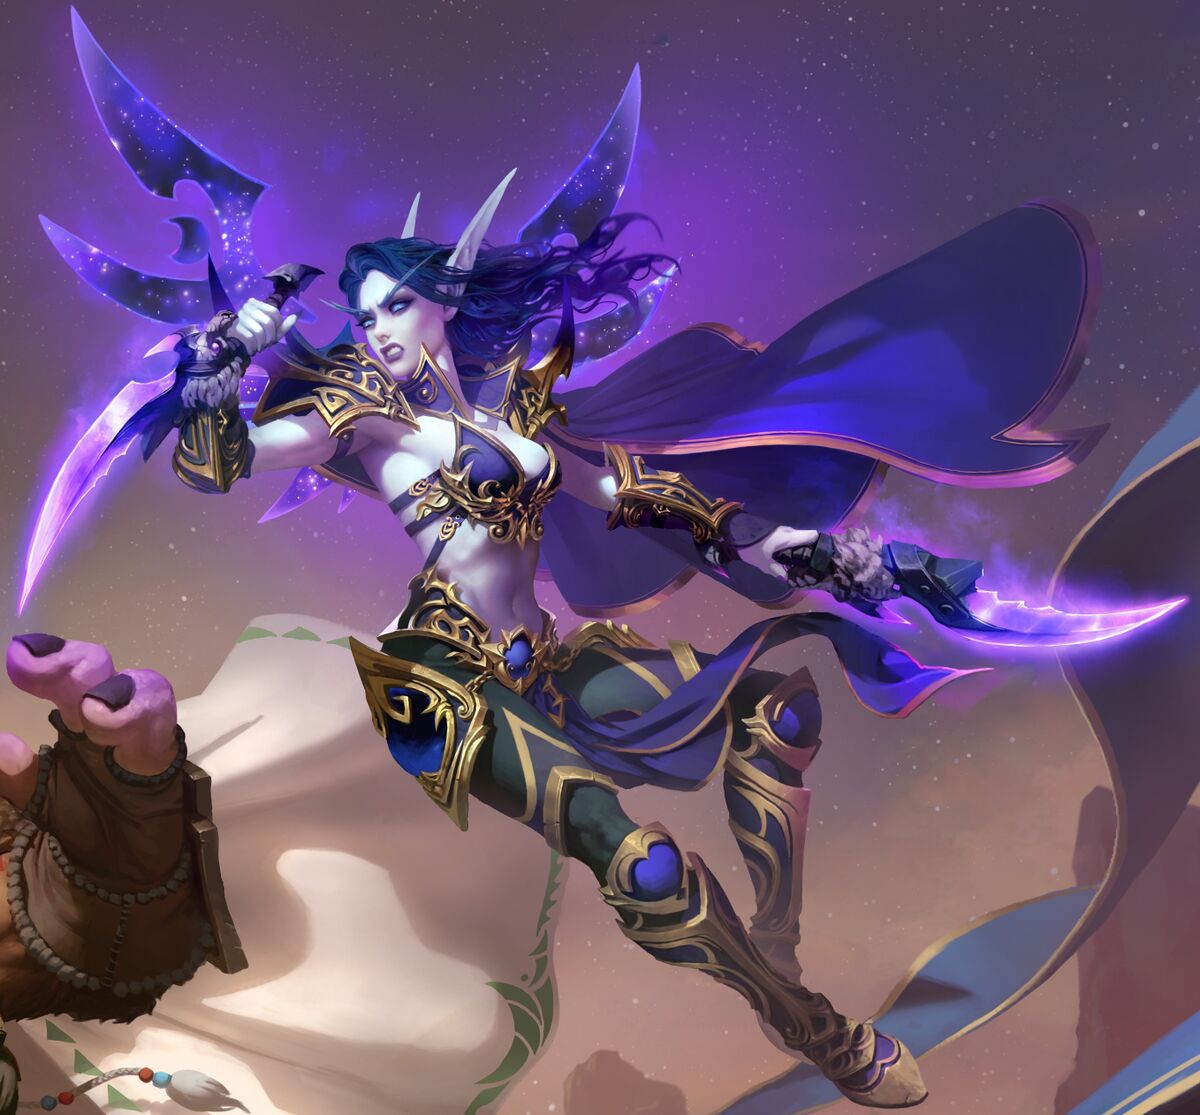 Void elf - Warcraft Wiki - Your wiki guide to the World of Warcraft